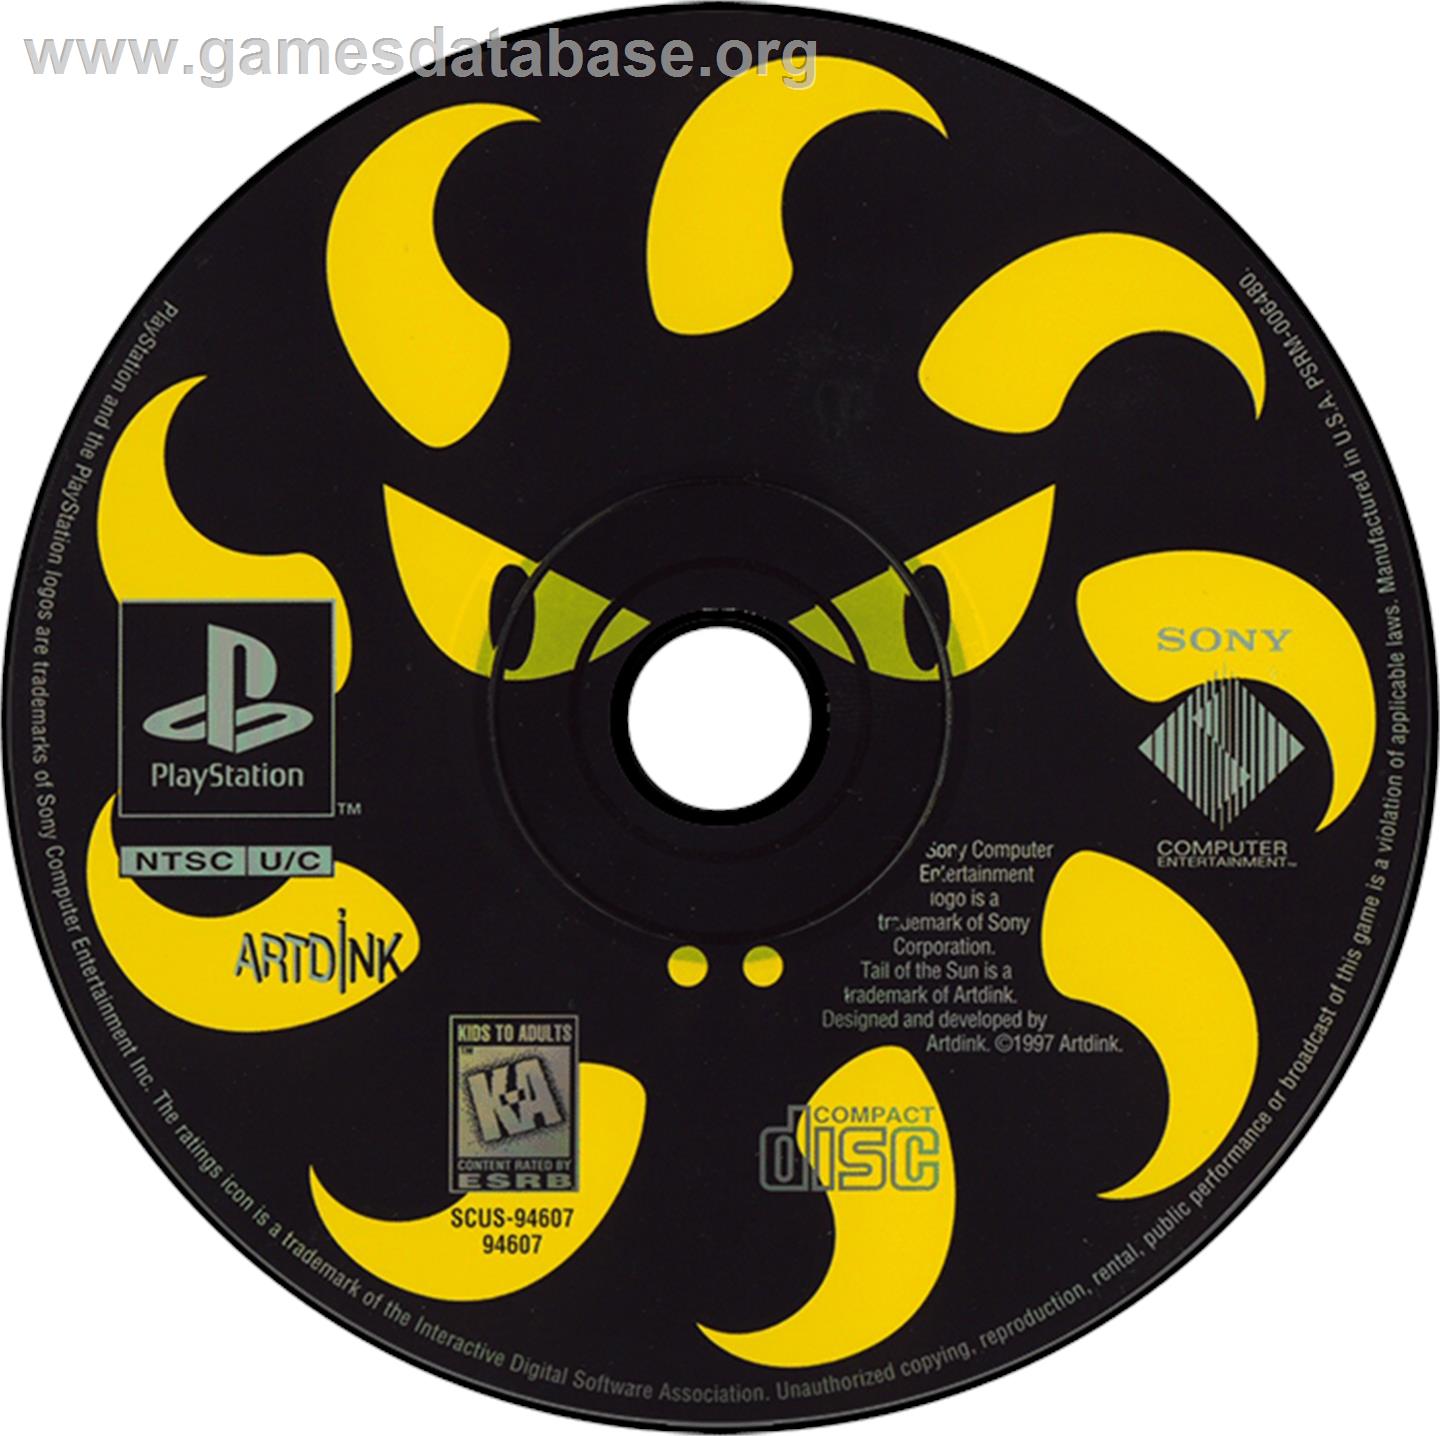 Tail of the Sun - Sony Playstation - Artwork - Disc